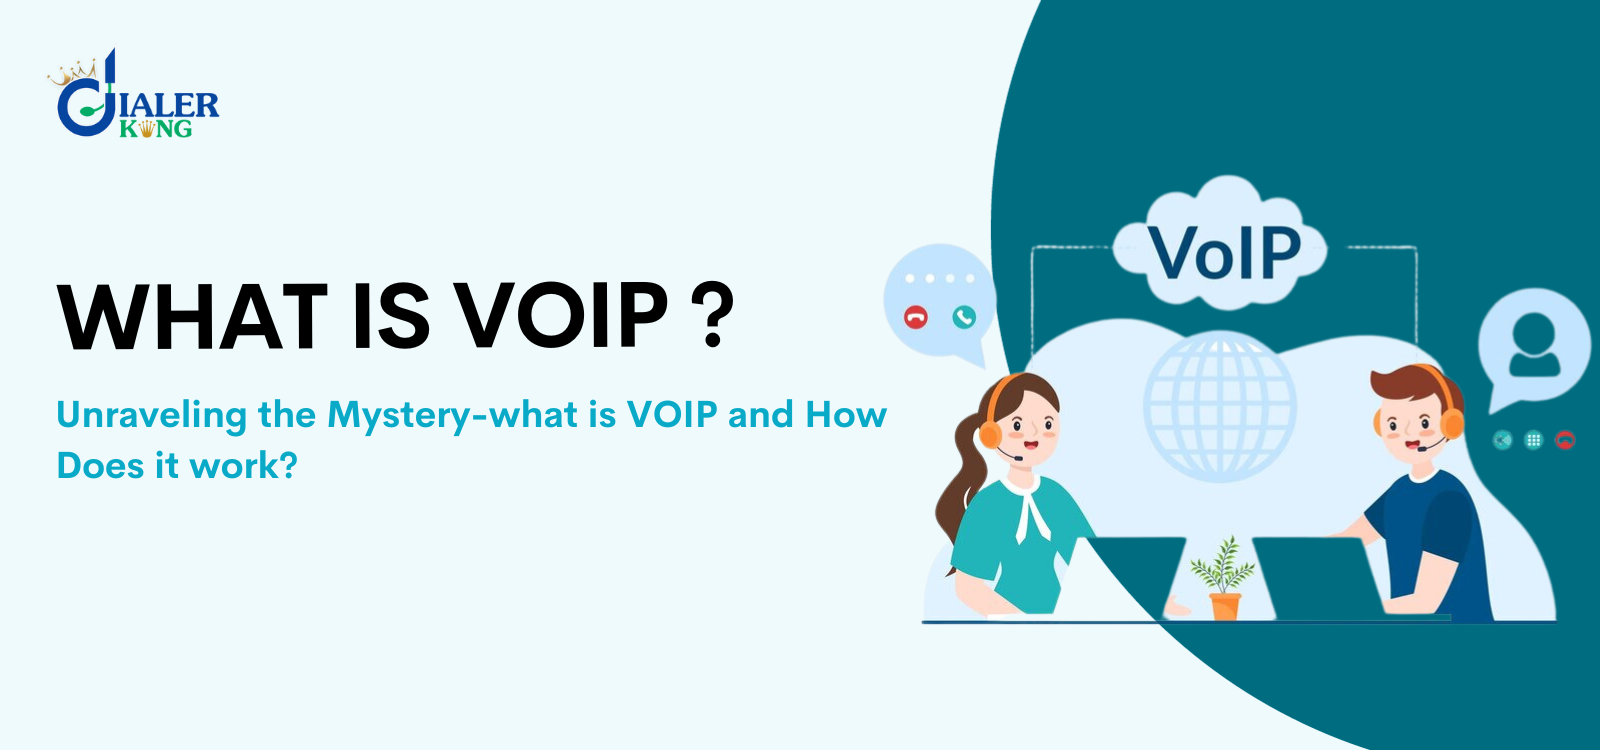 Voip solutions